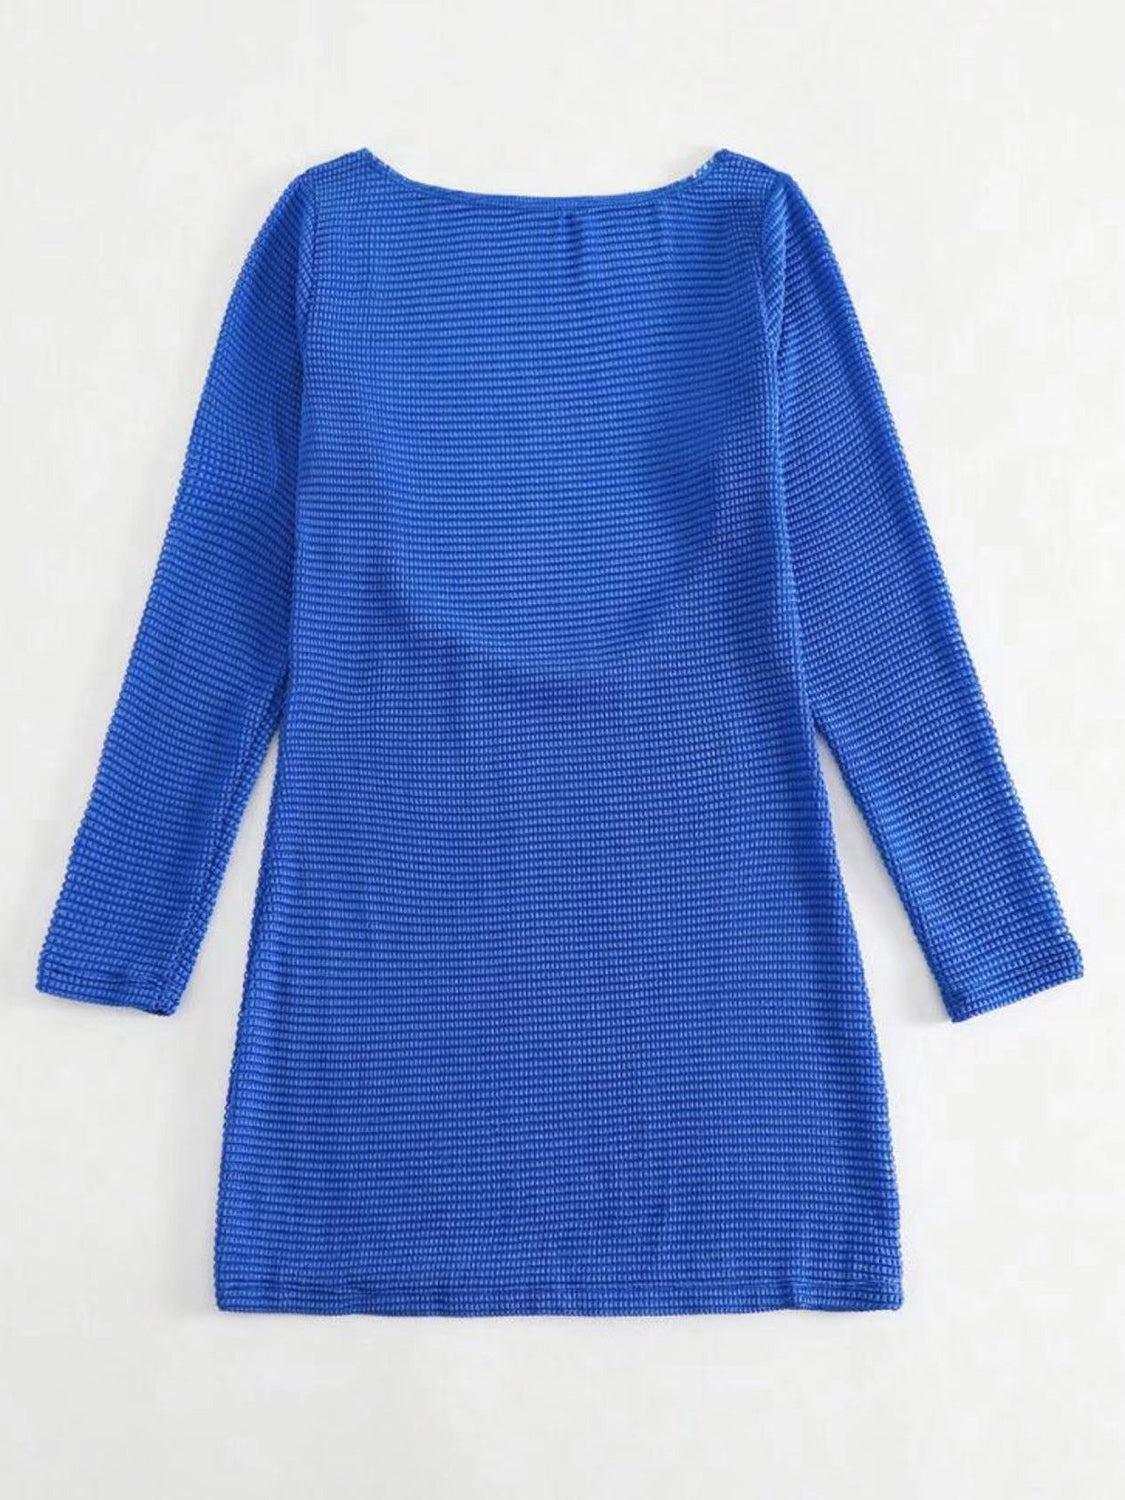 a women's blue sweater dress on a white background